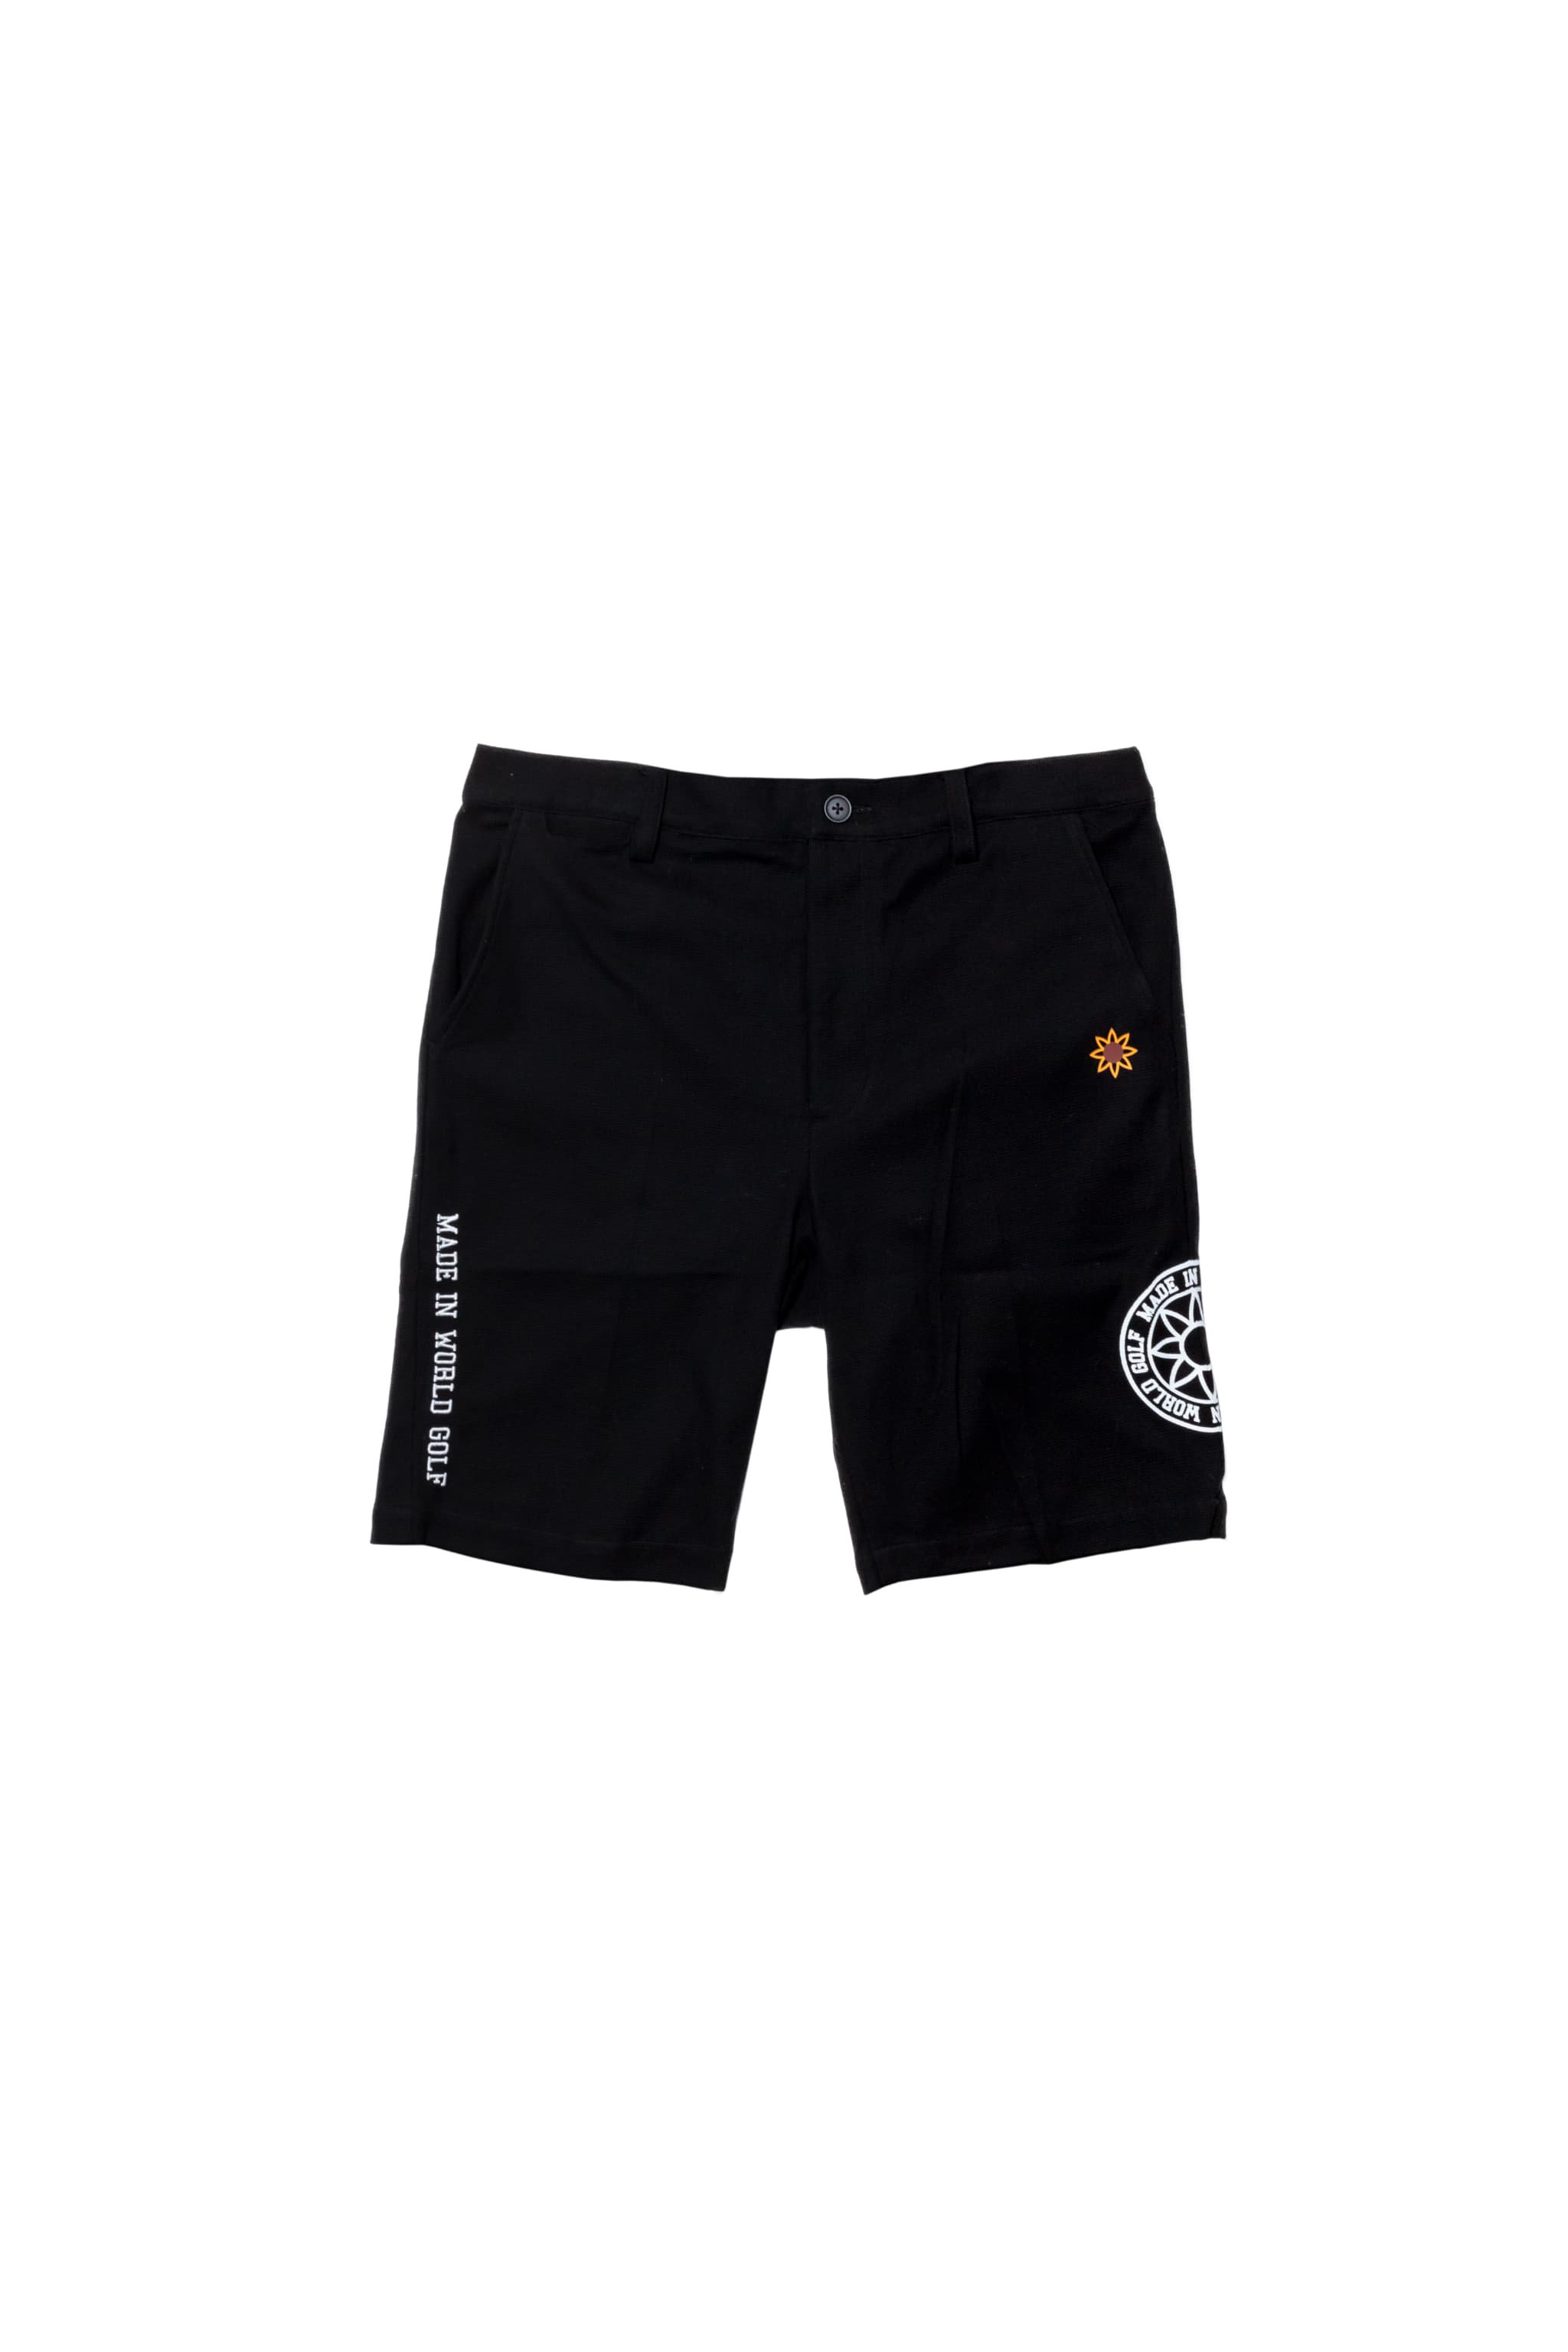 <img class='new_mark_img1' src='https://img.shop-pro.jp/img/new/icons50.gif' style='border:none;display:inline;margin:0px;padding:0px;width:auto;' />SURF KNIT SHORTS<br />black